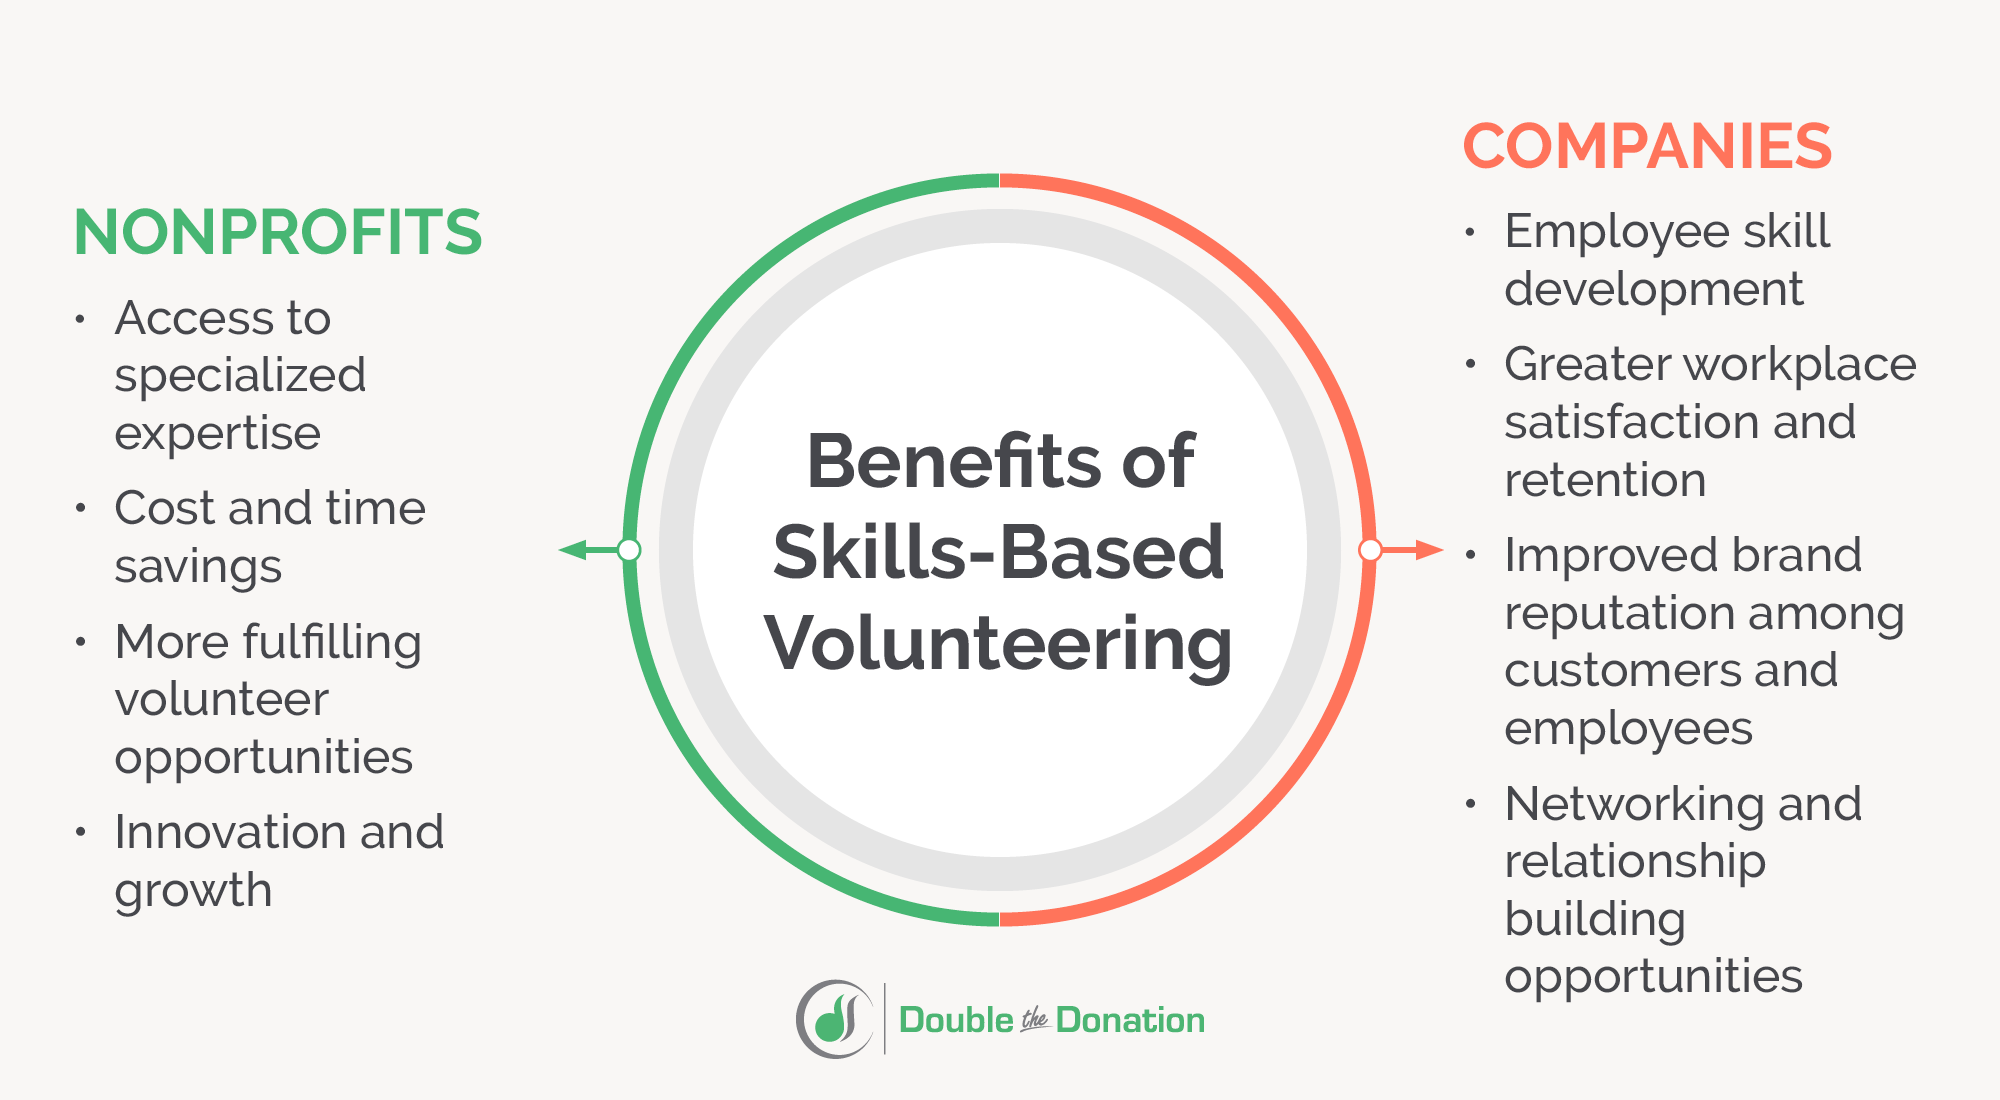 This graphic summarizes the benefits of skills-based volunteering, explained below.